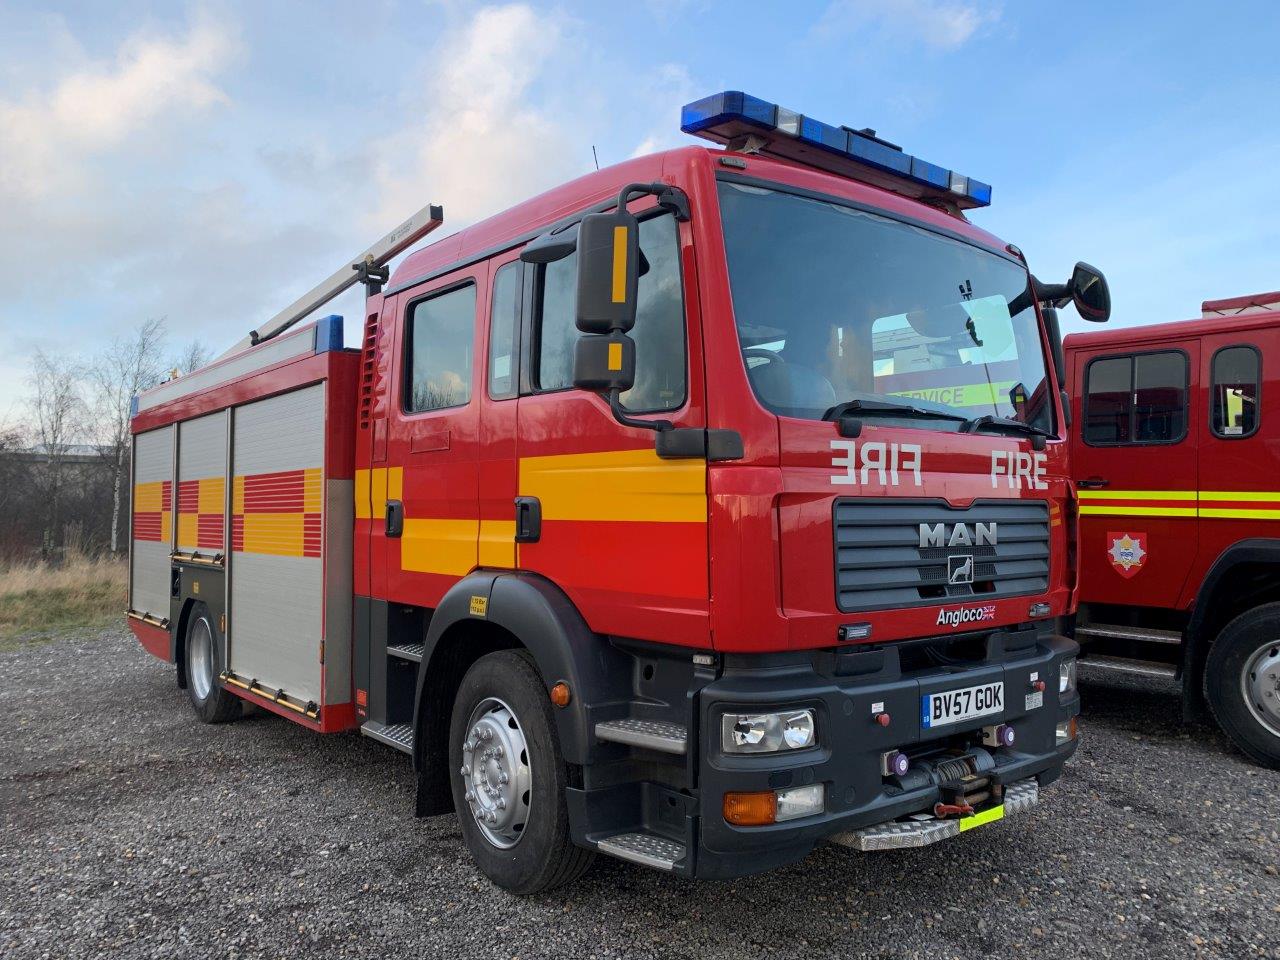 MAN TGM 18.240 WrL (Fire Engine) - Govsales of mod surplus ex army trucks, ex army land rovers and other military vehicles for sale